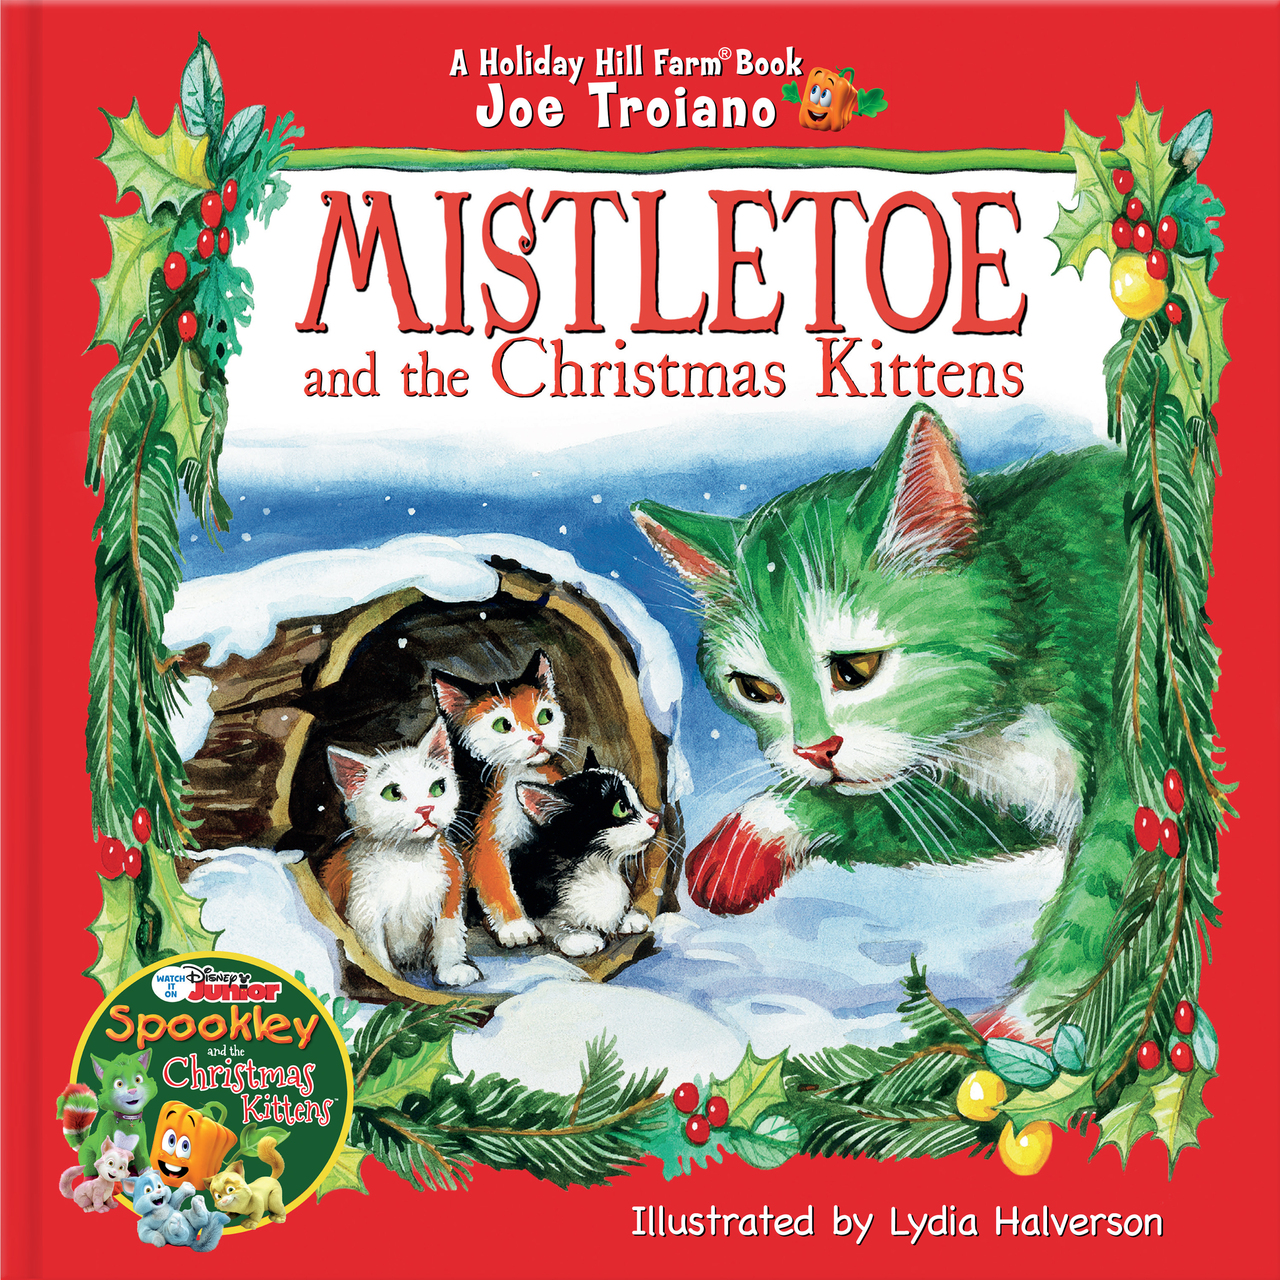 Mistletoe and the Christas Kittens - Spookley the Square Pumpkin